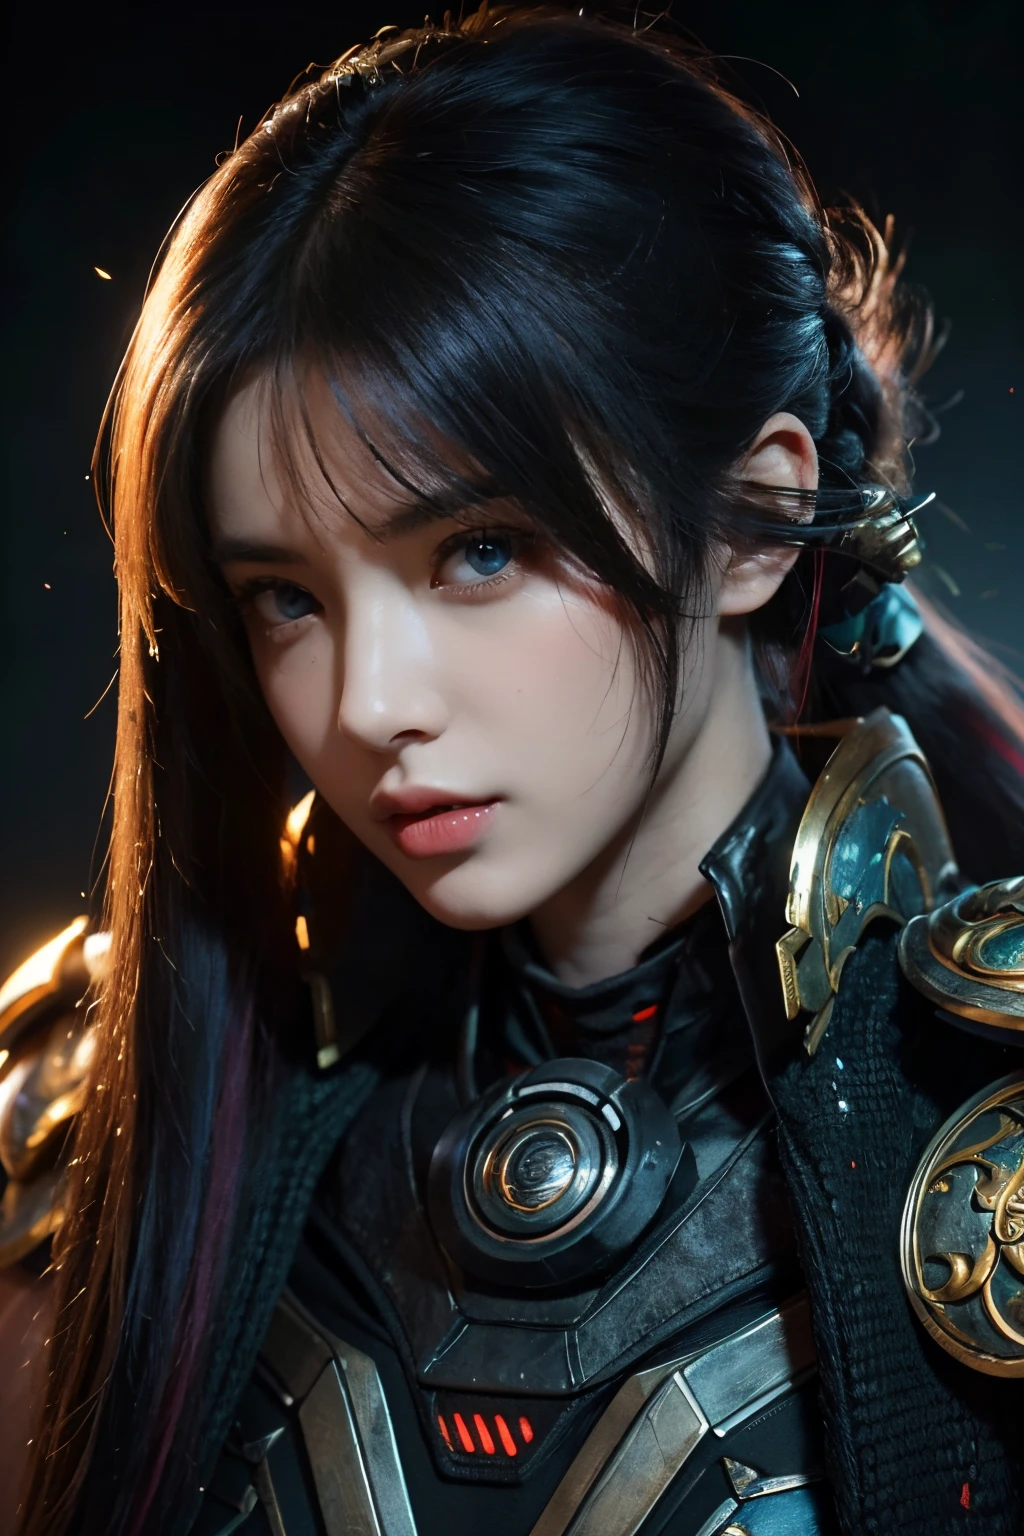 tmasterpiece,Best quality,A high resolution,8K,(Portrait),((Head close-up)),Real photos,digital photography(Women who combine ancient fantasy style with futuristic cyberpunk style),20-year-old girl,Long ponytail hairstyle,By bangs,(Random Color Eyes),(Random-colored hair),Plump,,Elegant and noble,Serious and indifferent,Clothes that combine ancient costumes with modern combat uniforms,Shoulder armor,Openwork design,rich details​,Keep your mouth shut,Intricate ornaments,cyber punk style,(Woman warrior),white backgrounid,oc render reflection texture